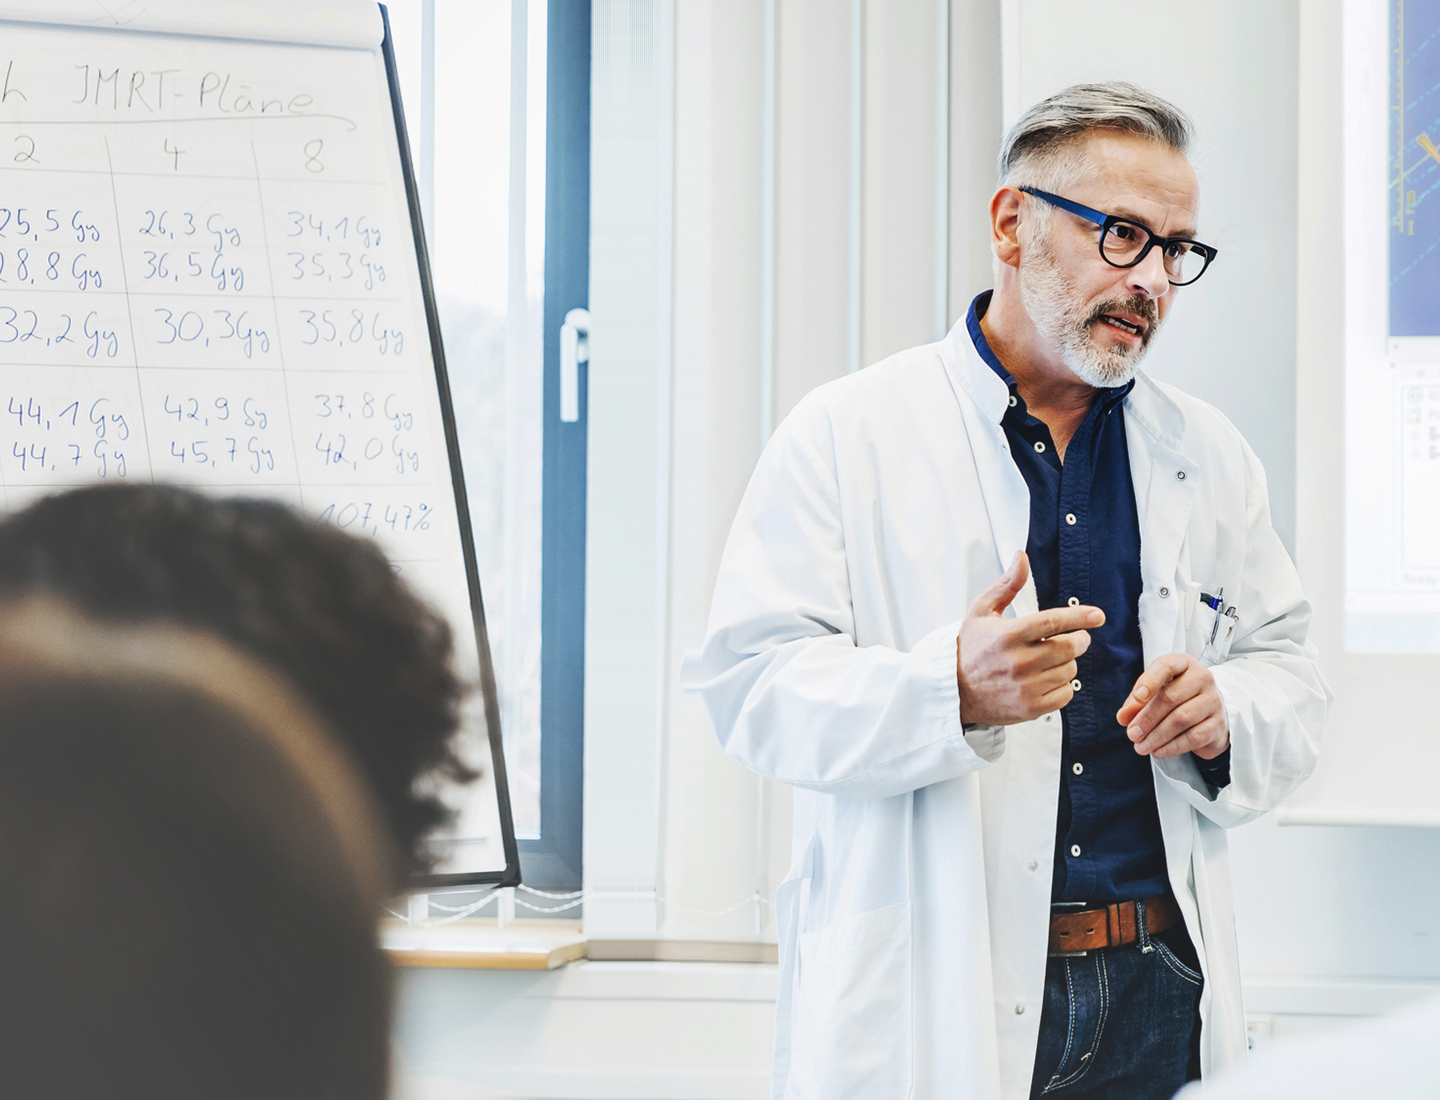 Doctor giving lecture in front of whiteboard